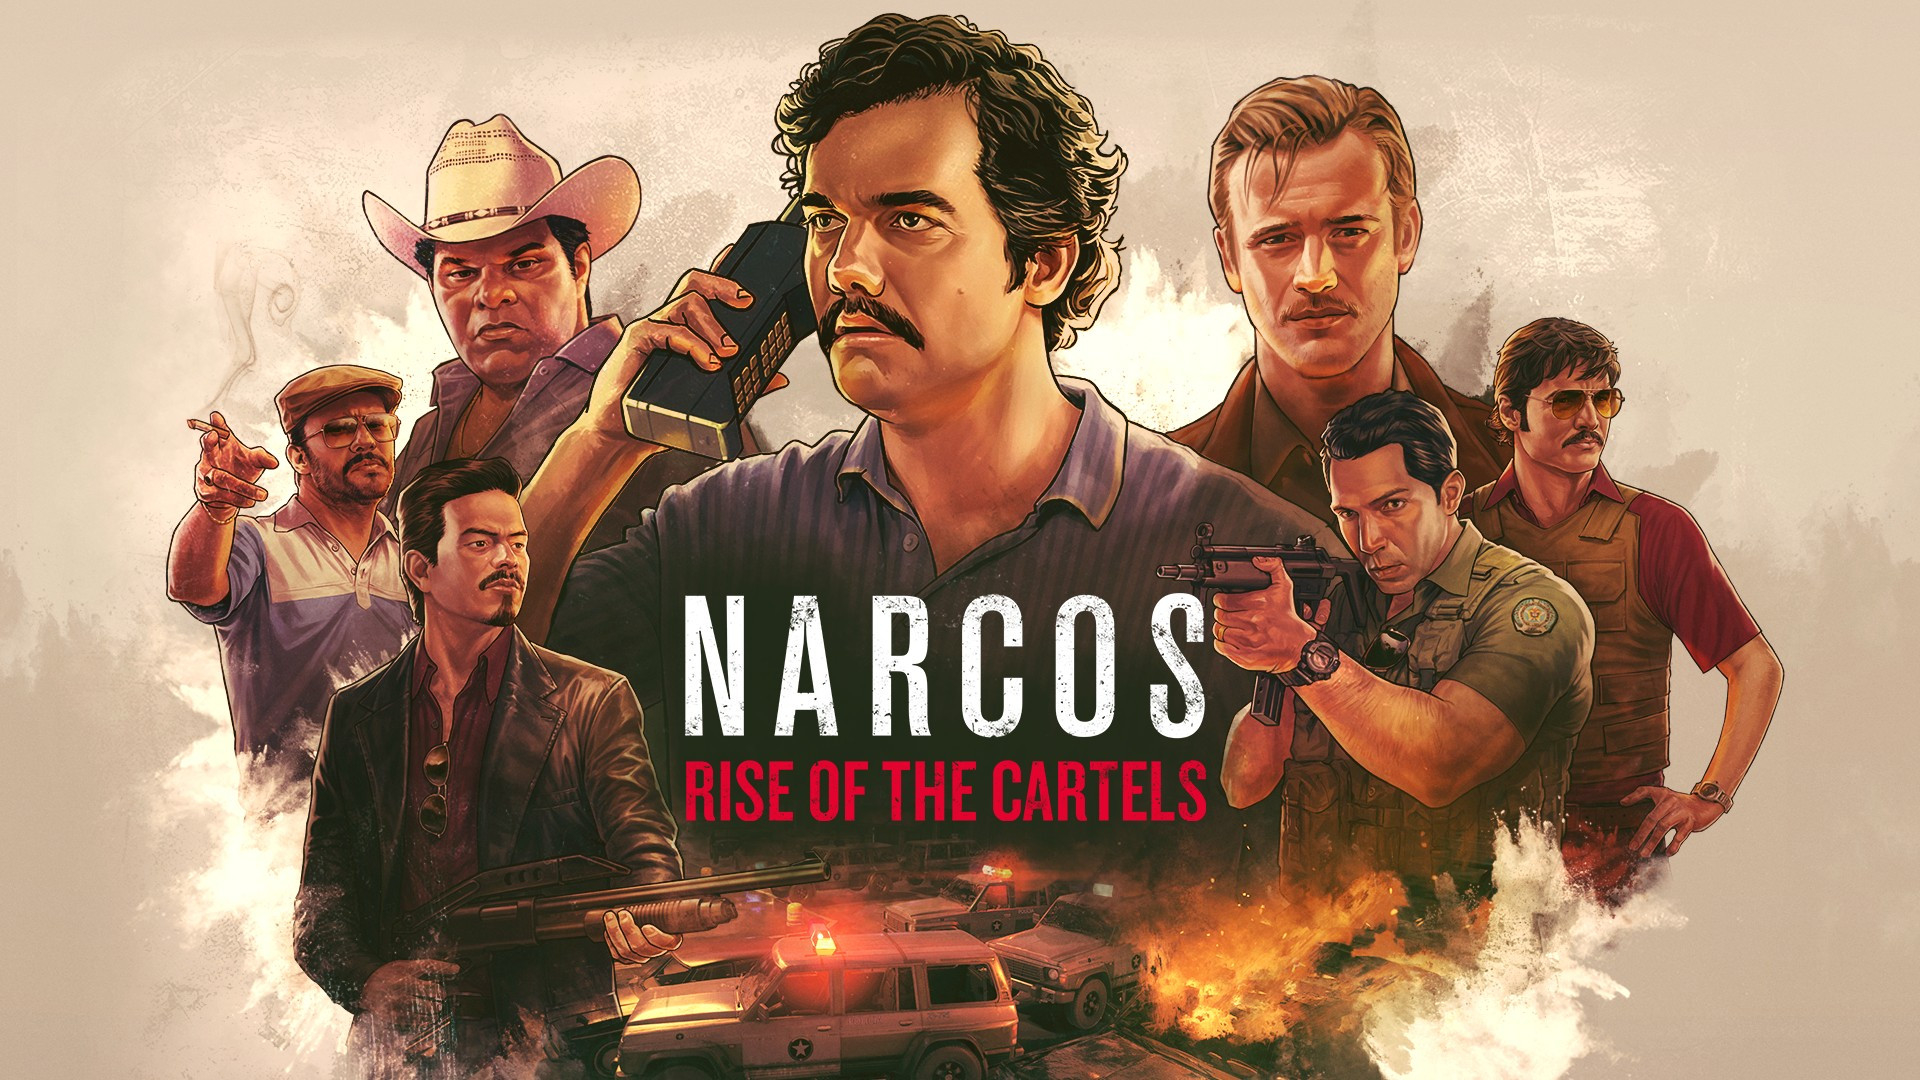 1920x1080202149 Narcos HD Poster 1920x1080202149 Resolution Wallpaper, HD  TV Series 4K Wallpapers, Images, Photos and Background - Wallpapers Den